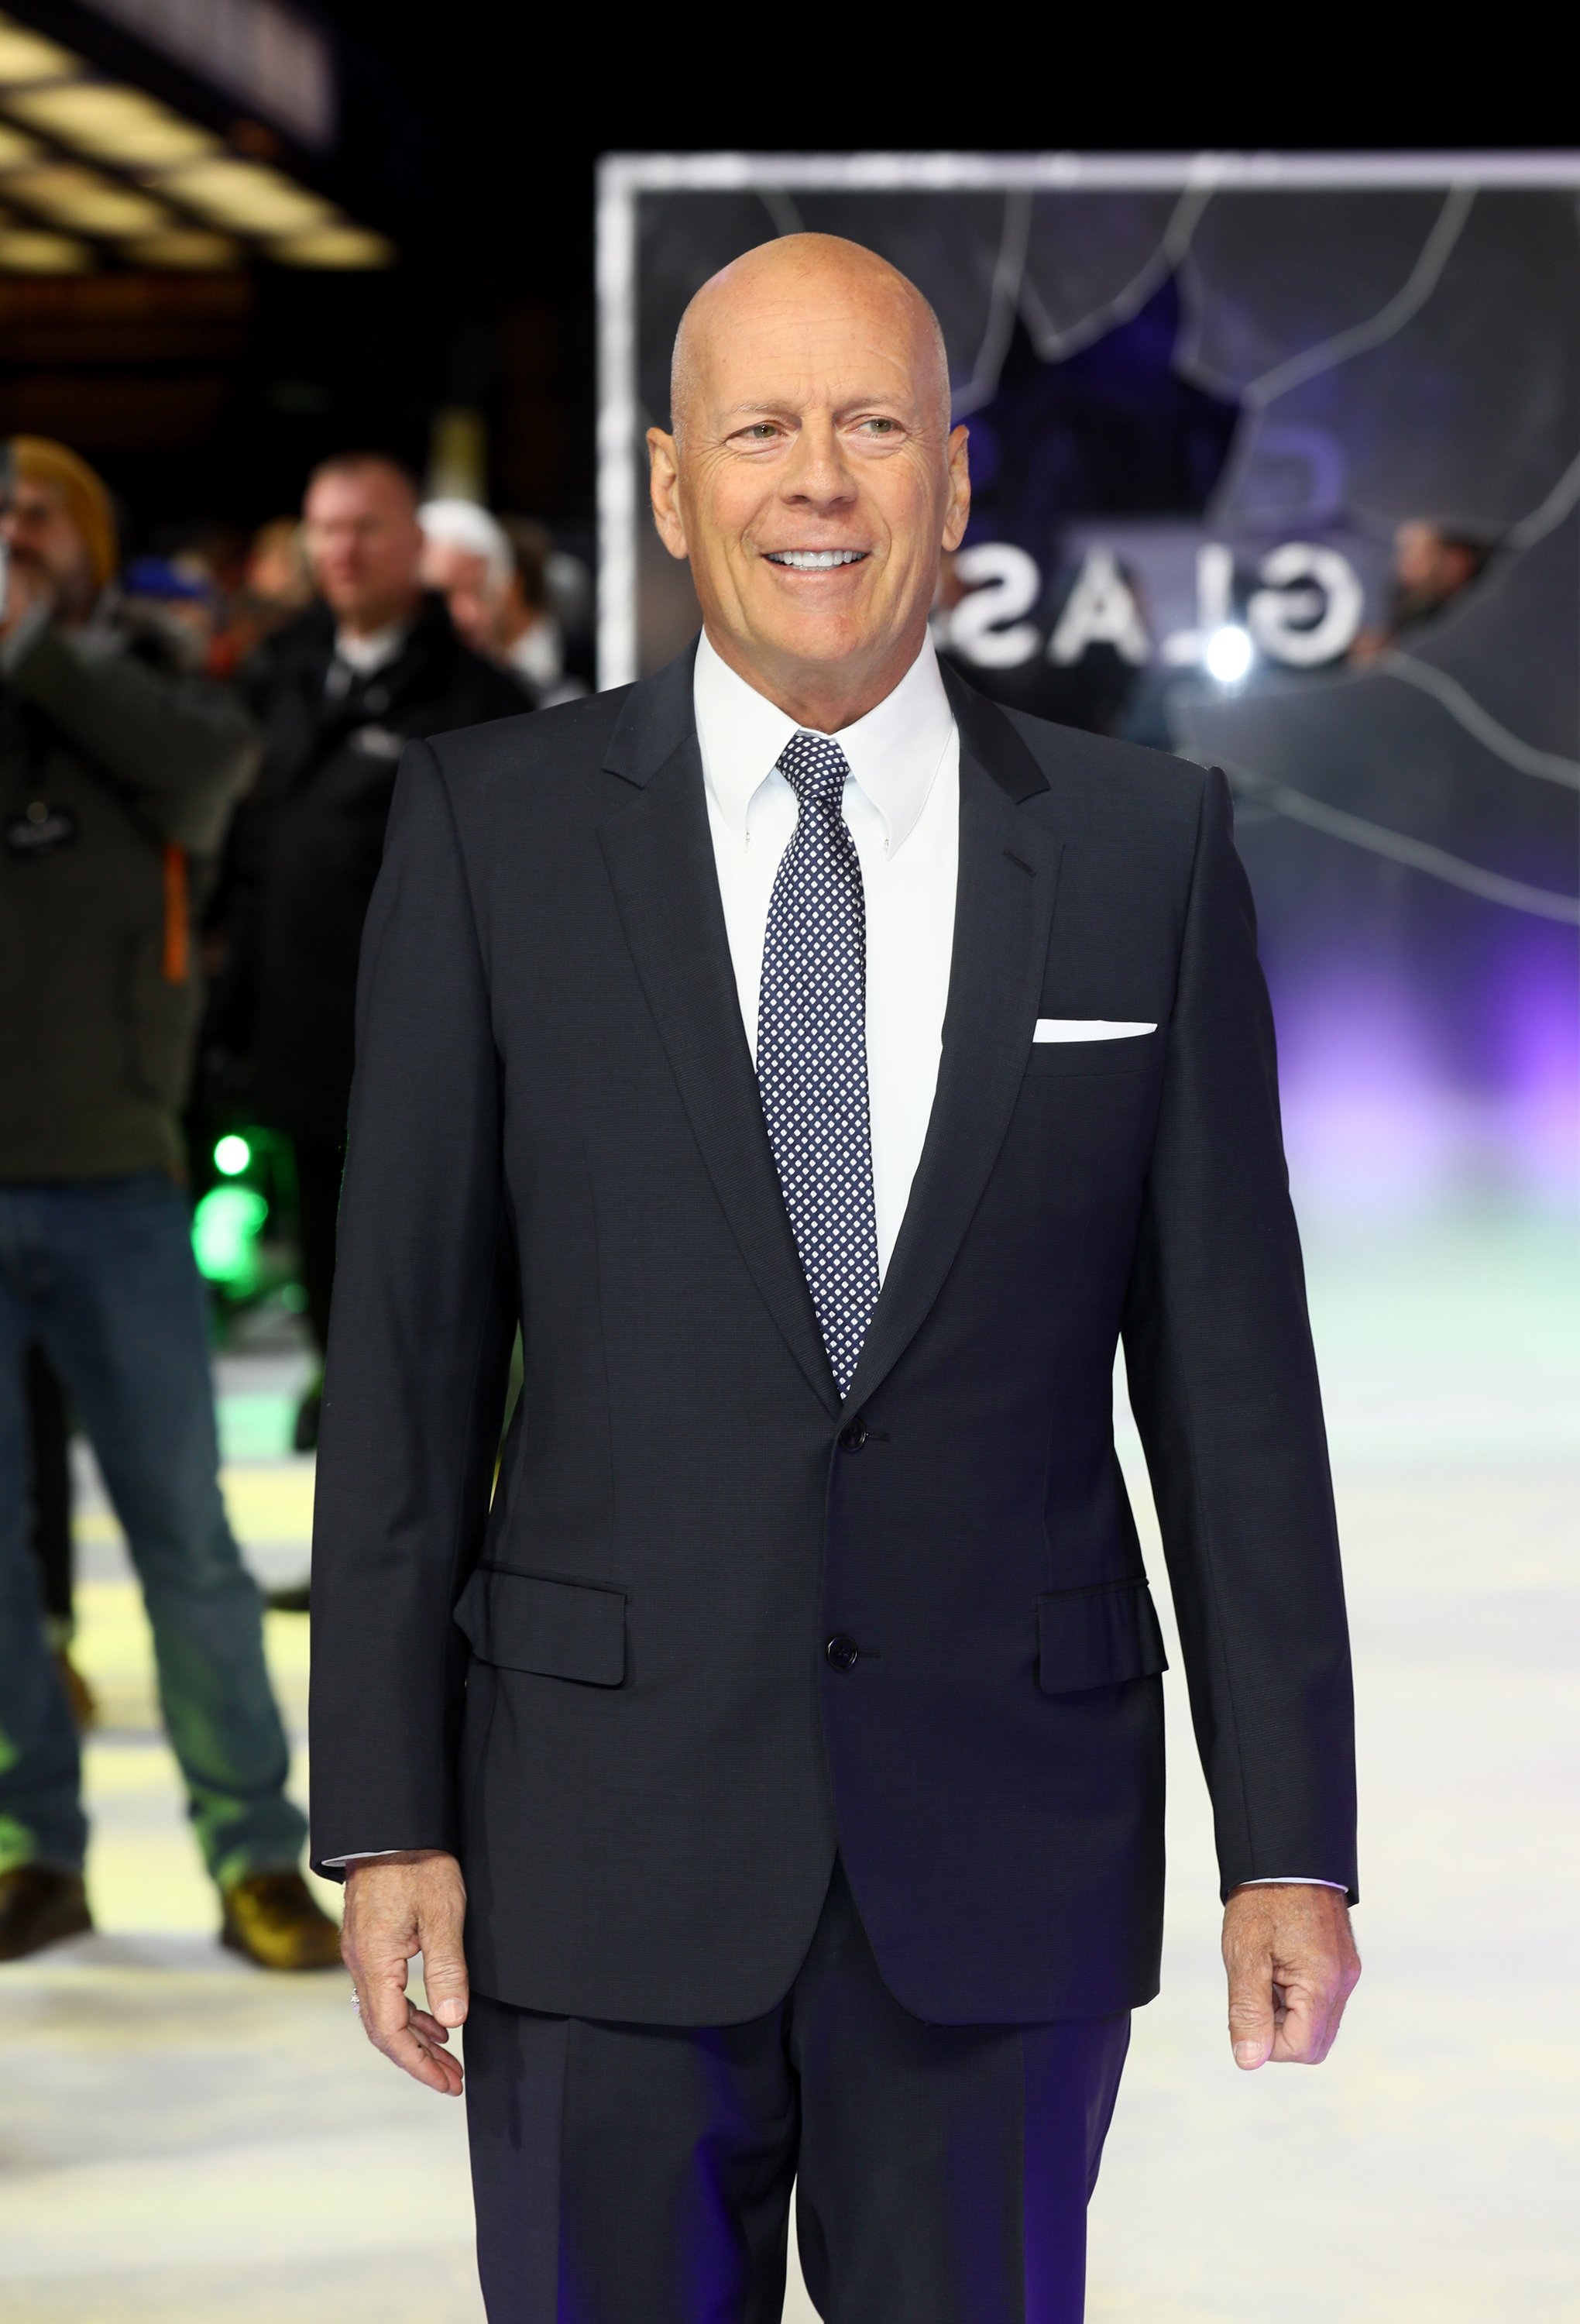  Bruce Willis attends the UK Premiere of M. Night Shyamalan's all-new comic-book thriller "Glass" at Curzon Cinema Mayfair on January 9, 2019 | Photo: GettyImages